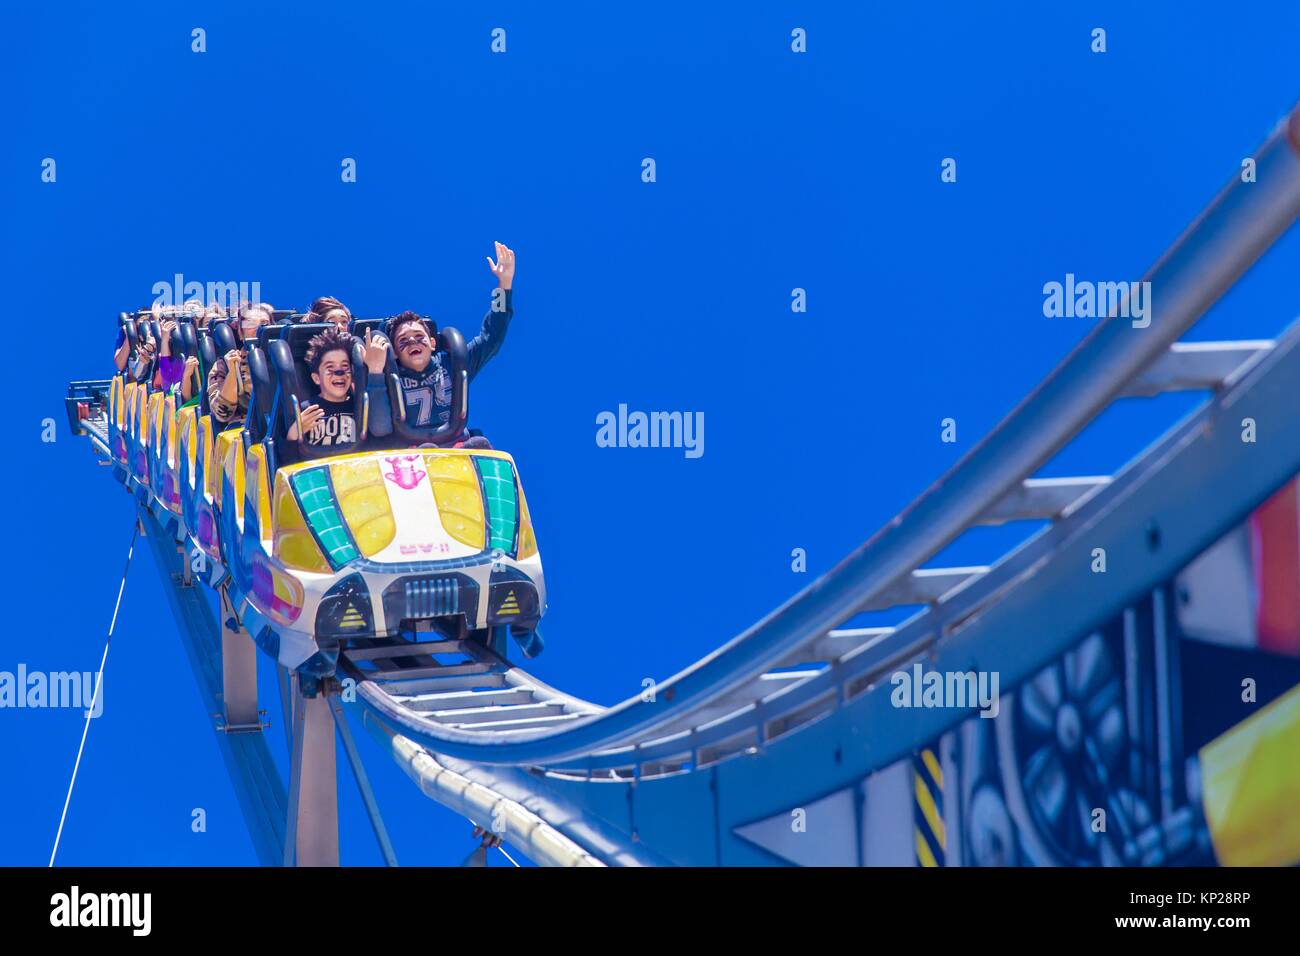 people taking a ride in a fairground attraction in Tenerife island Stock Photo